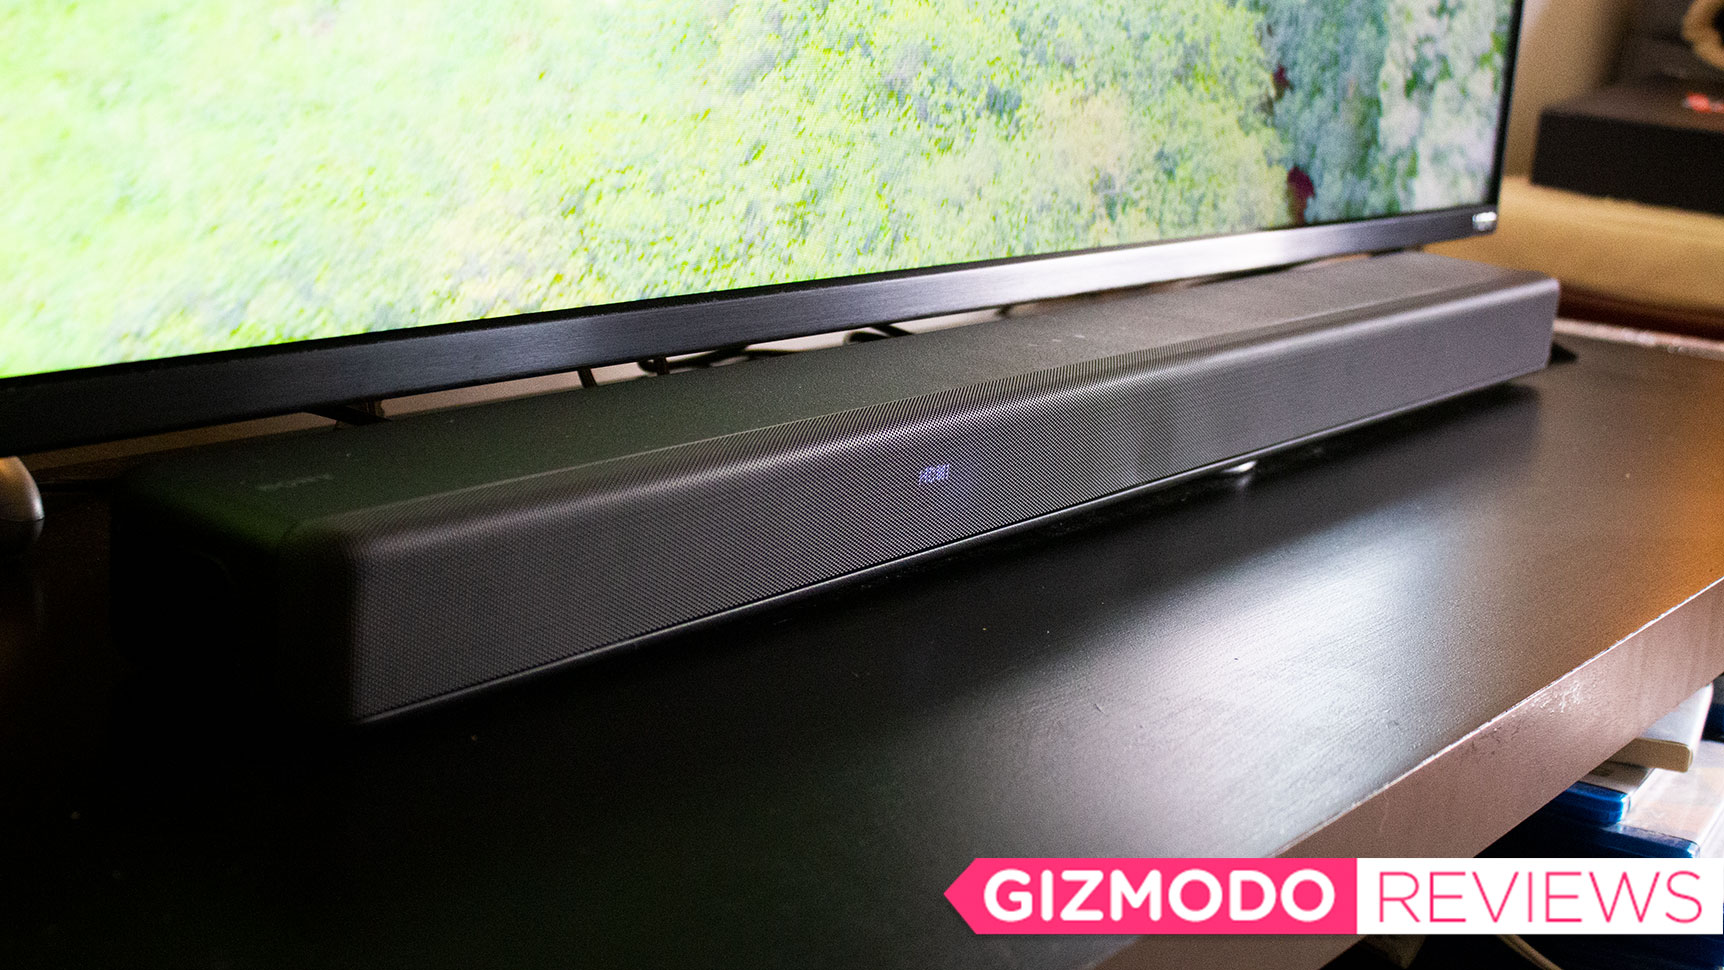 Soundbars The Makes Sony Dolby for a Atmos HT-G700 Great Case Budget